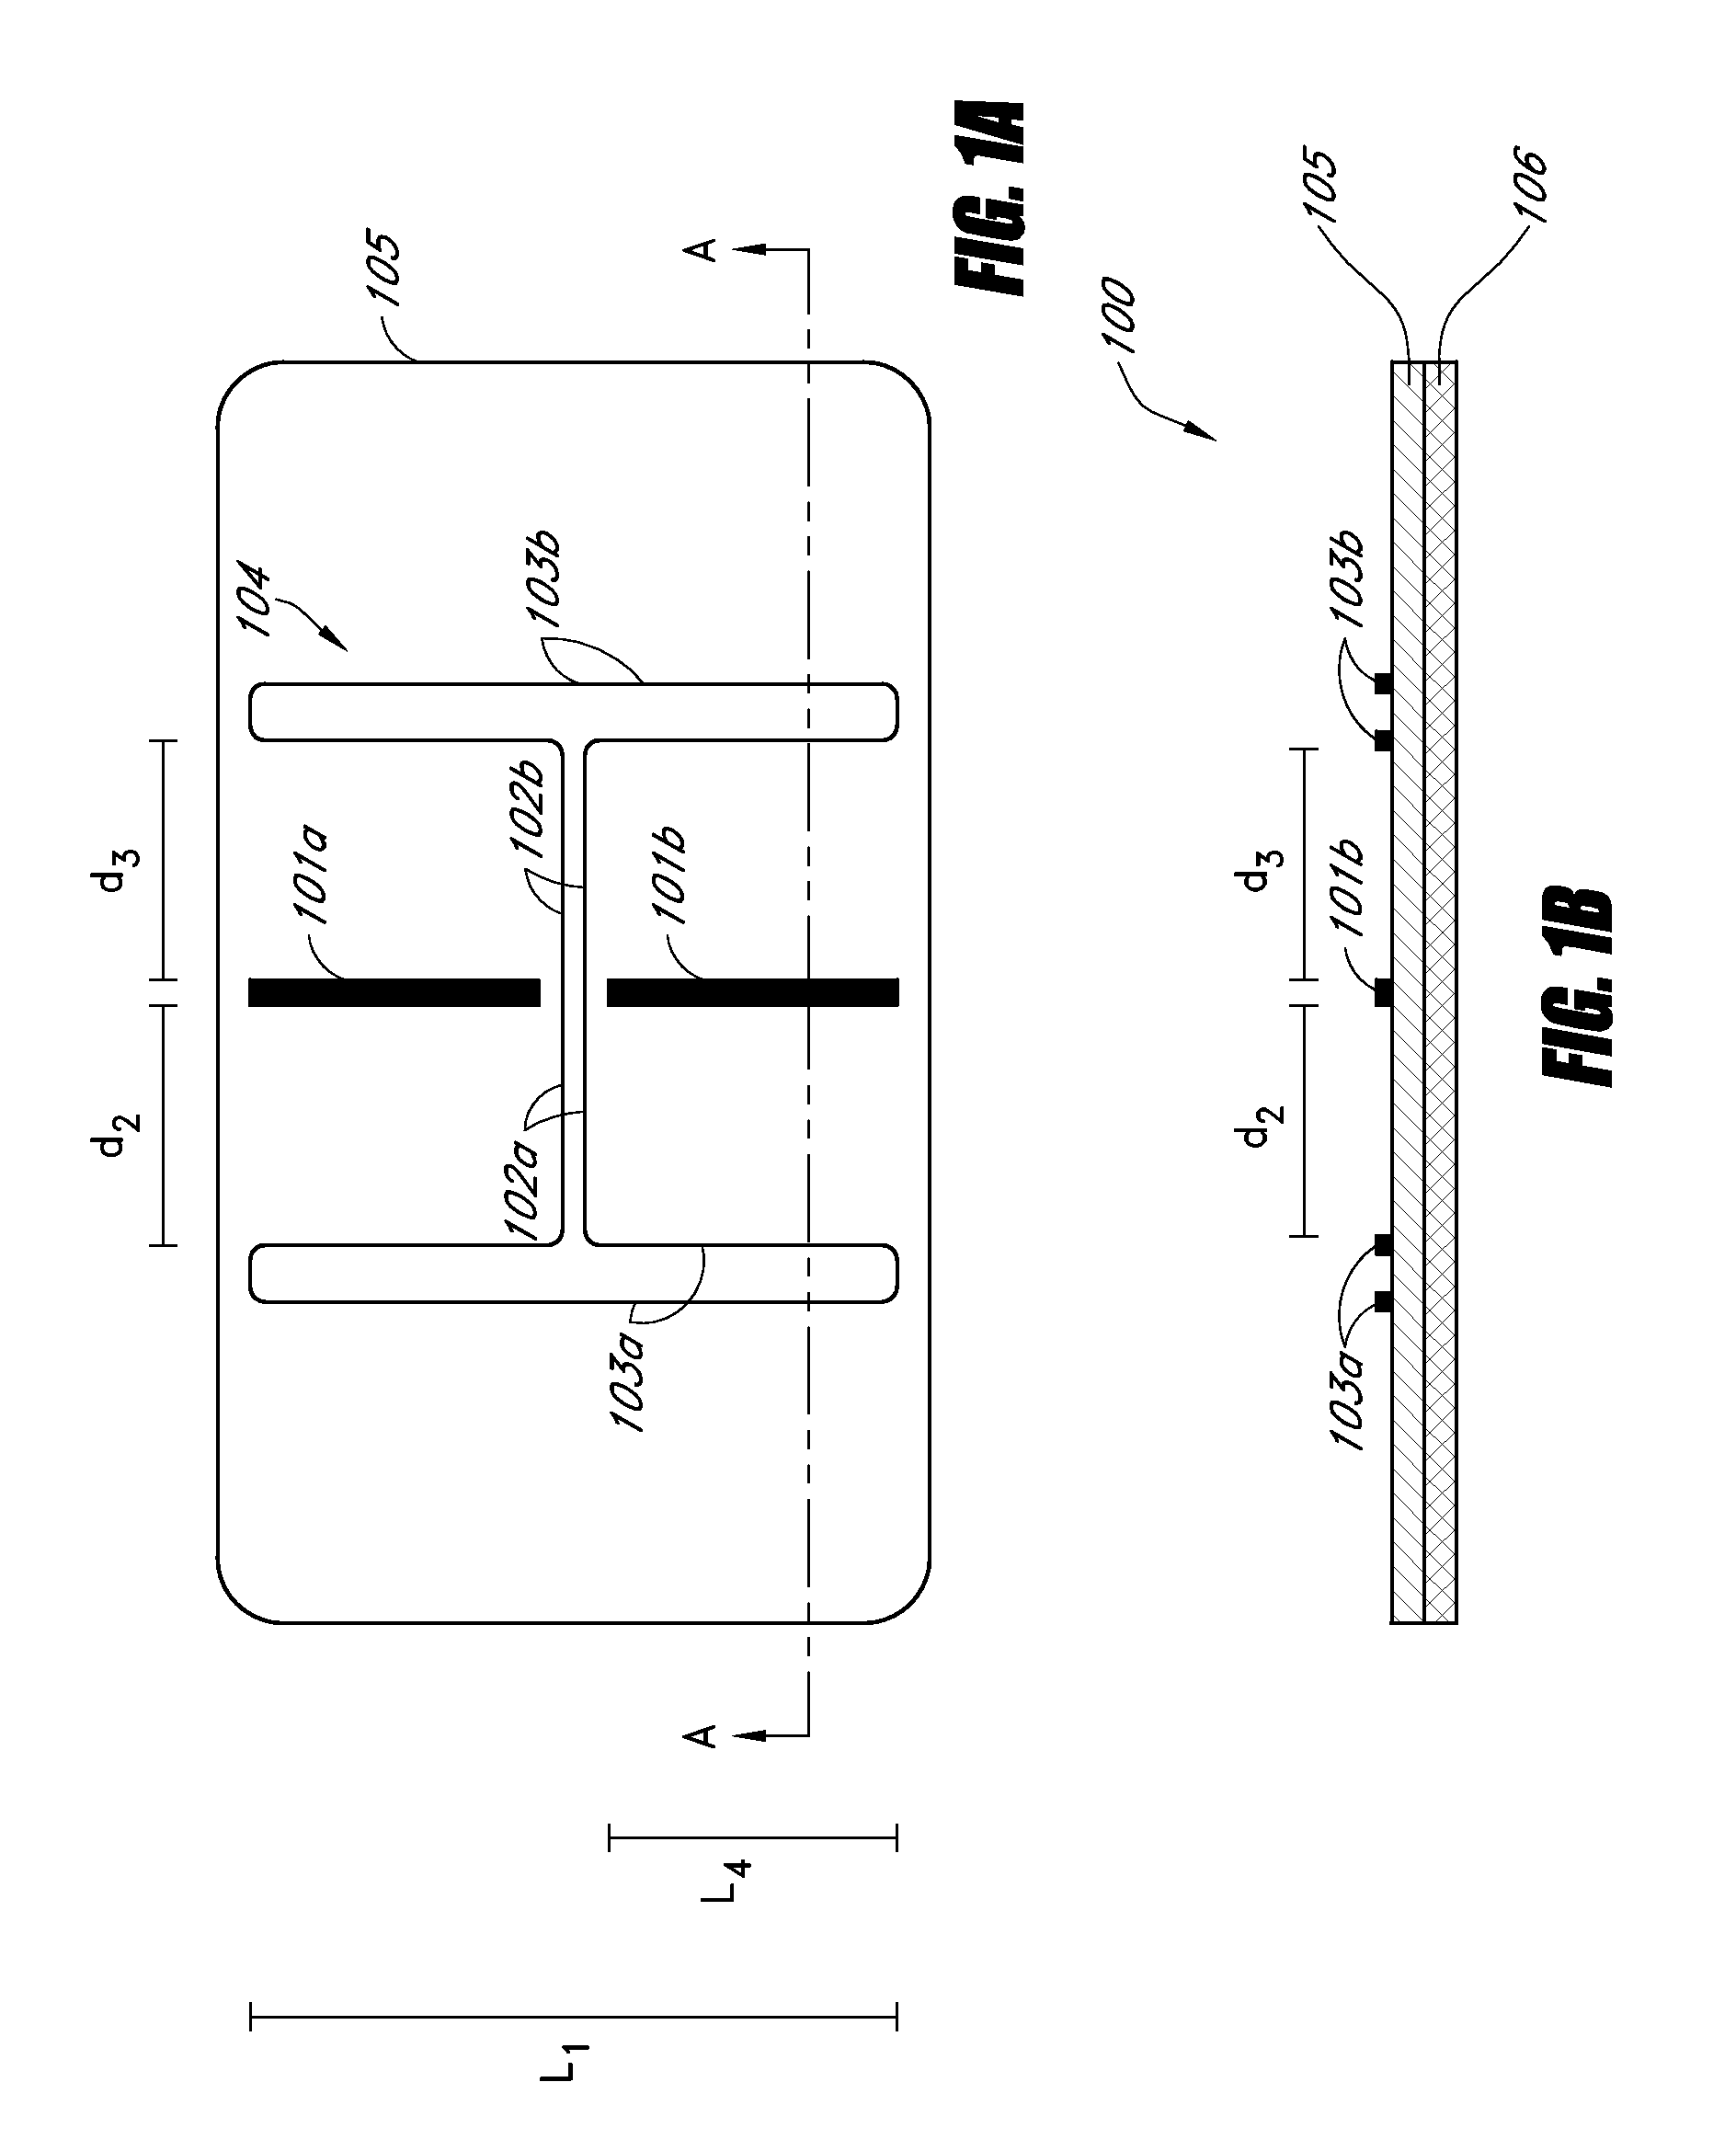 Passive repeater for wireless communications